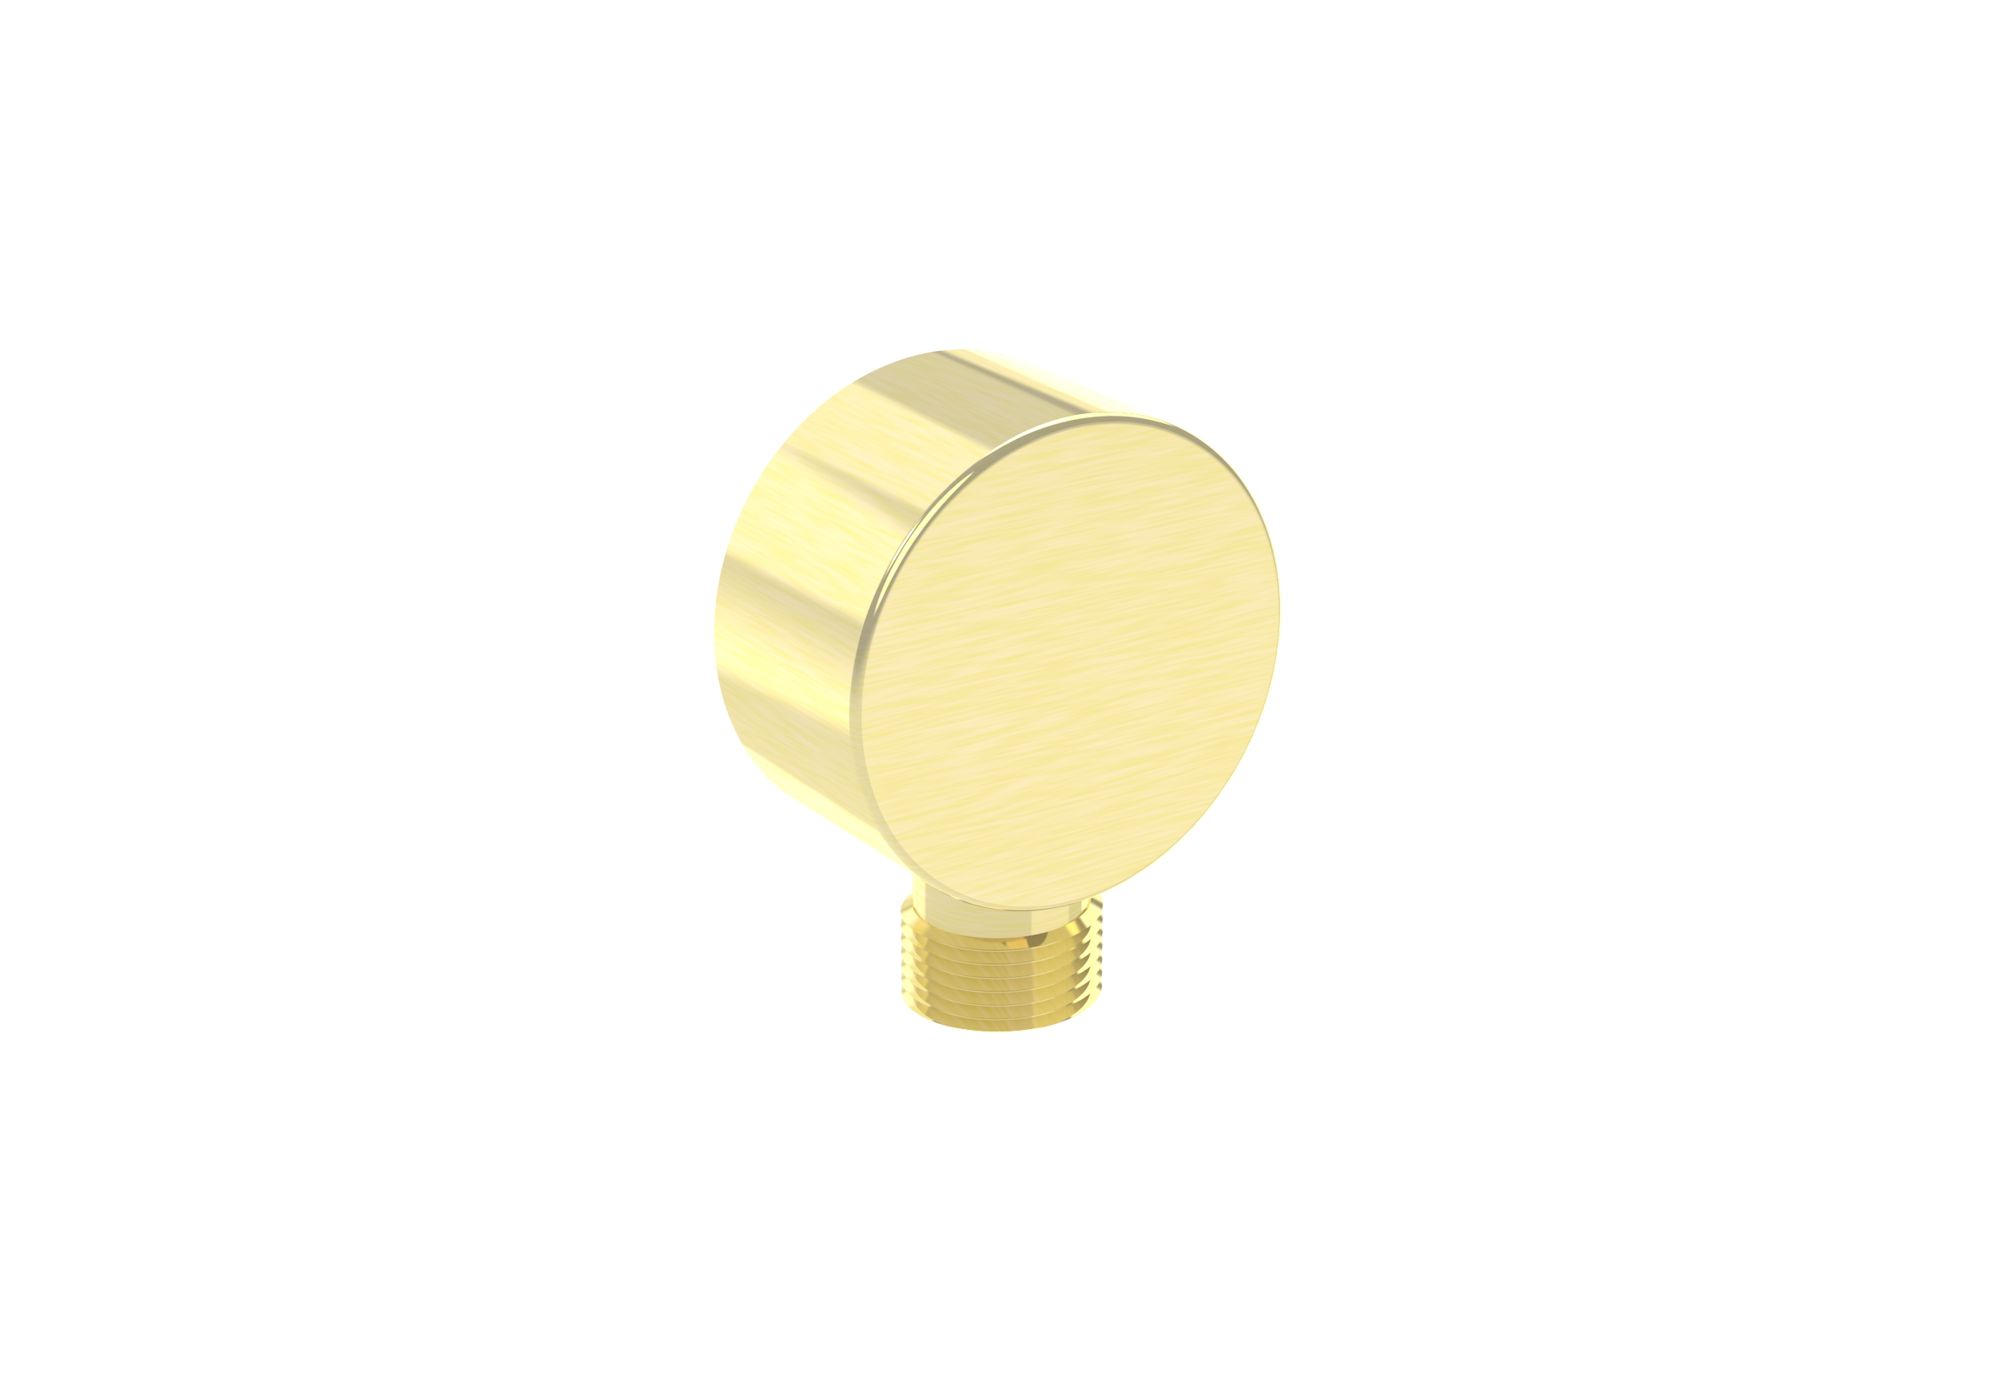 COS round shower outlet elbow - Brushed Brass